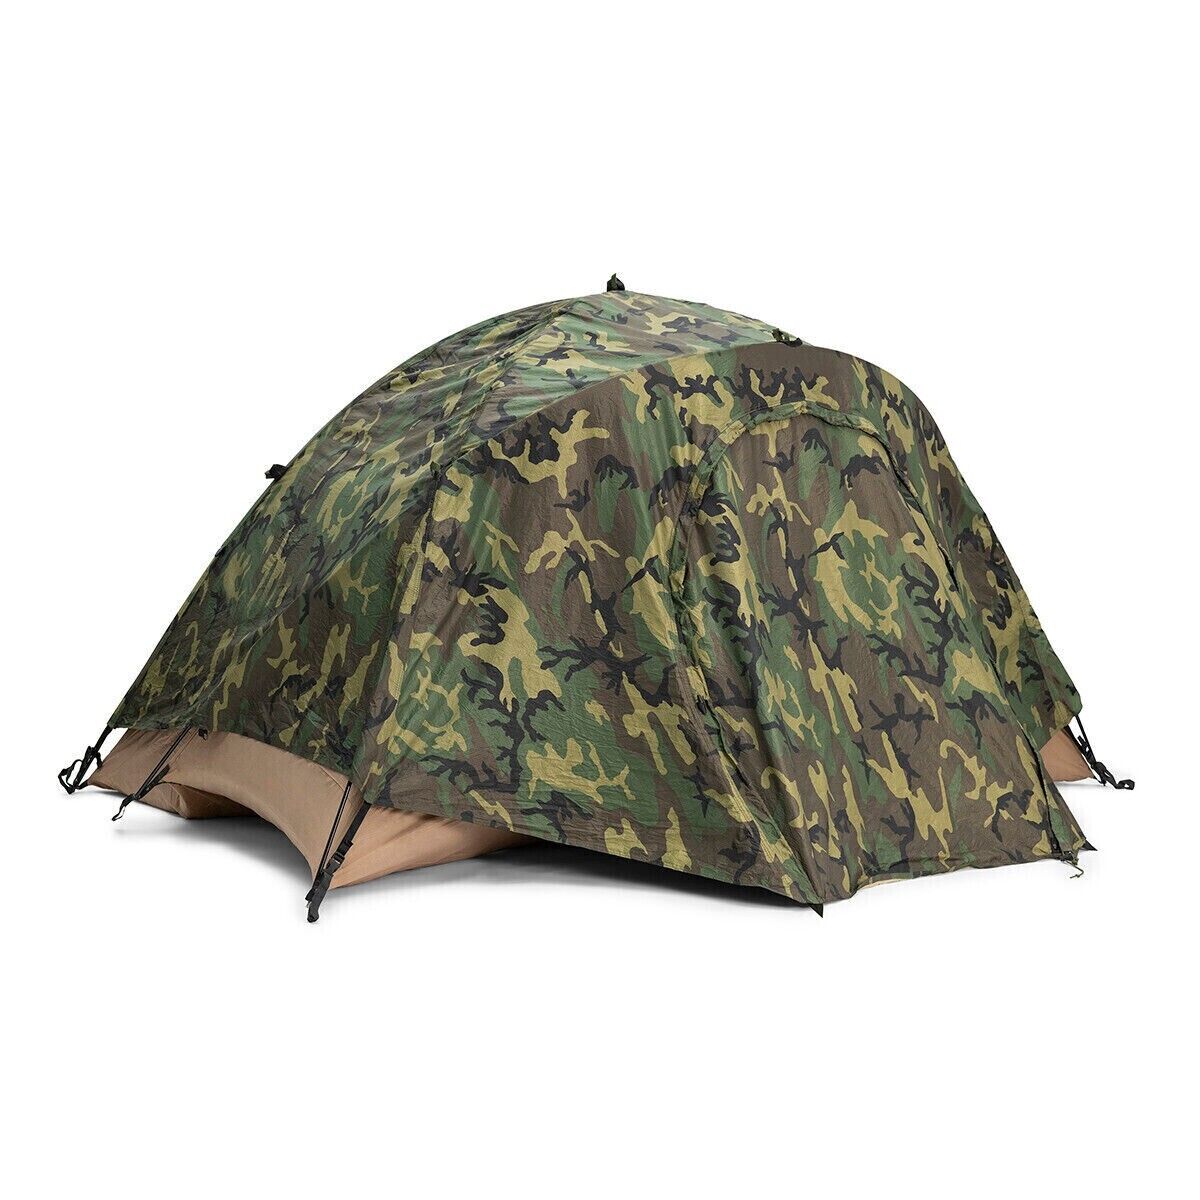 U.S. Armed Forces USMC Combat Issue 2 Man Tent - New